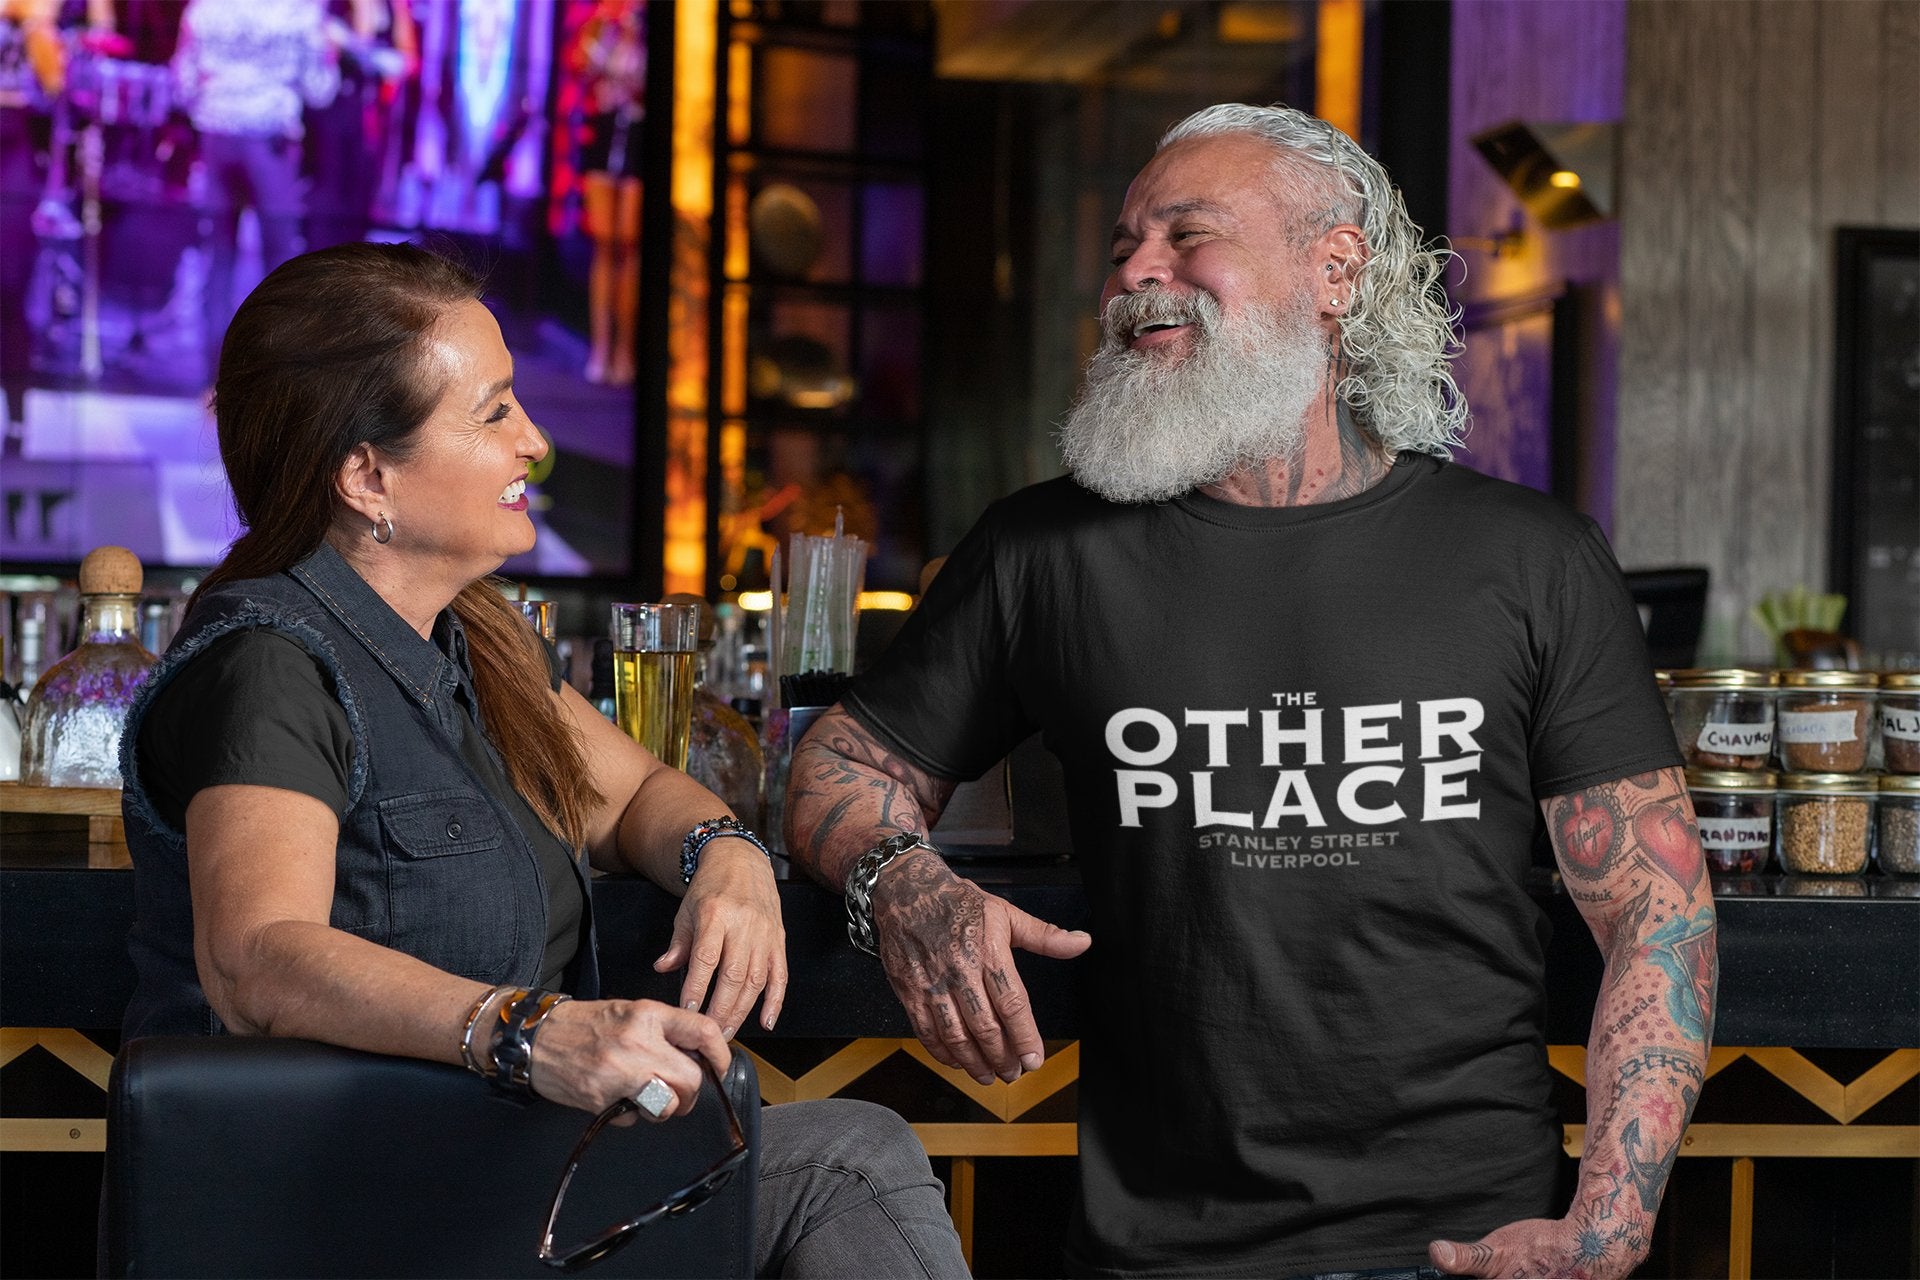 The Other Place unisex T-shirt - various colours - Dirty Stop Outs